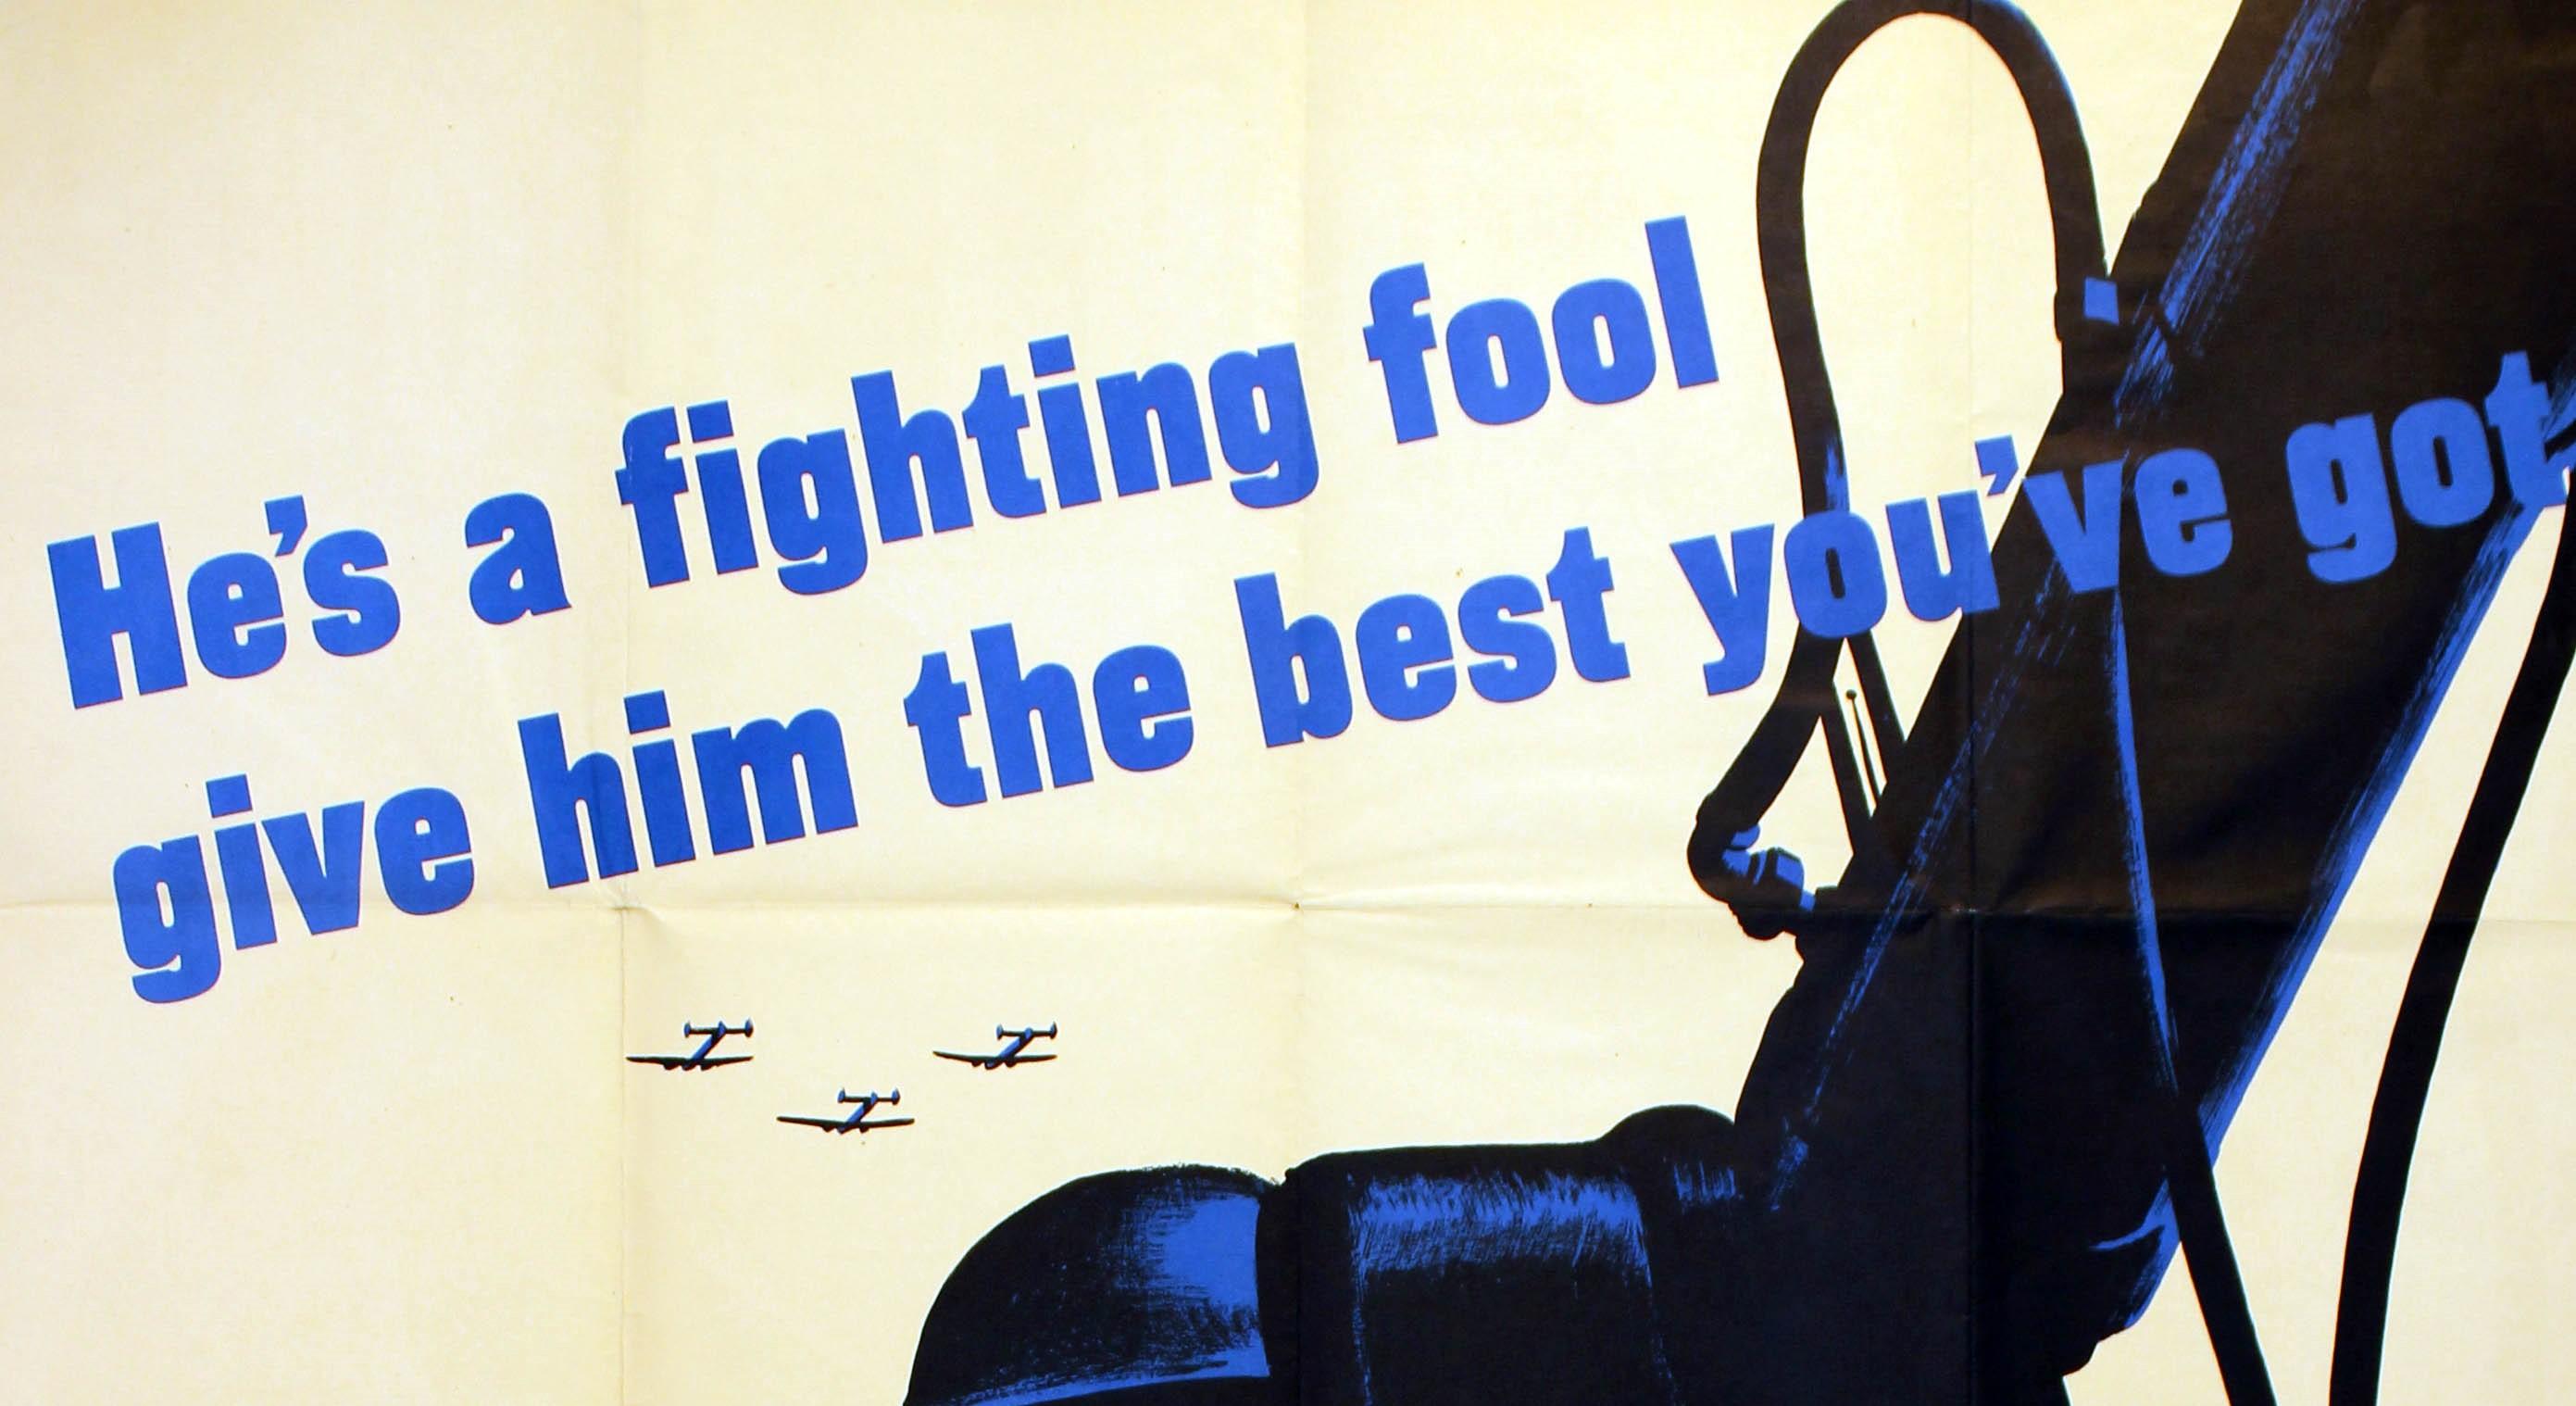 Original vintage World War Two poster: More Production. He's a fighting fool - give him the best you've got. Image of an anti-aircraft gunner in a helmet watching the sky with three airplanes flying overhead. Artwork by Fred Ludekens (1900-1982).